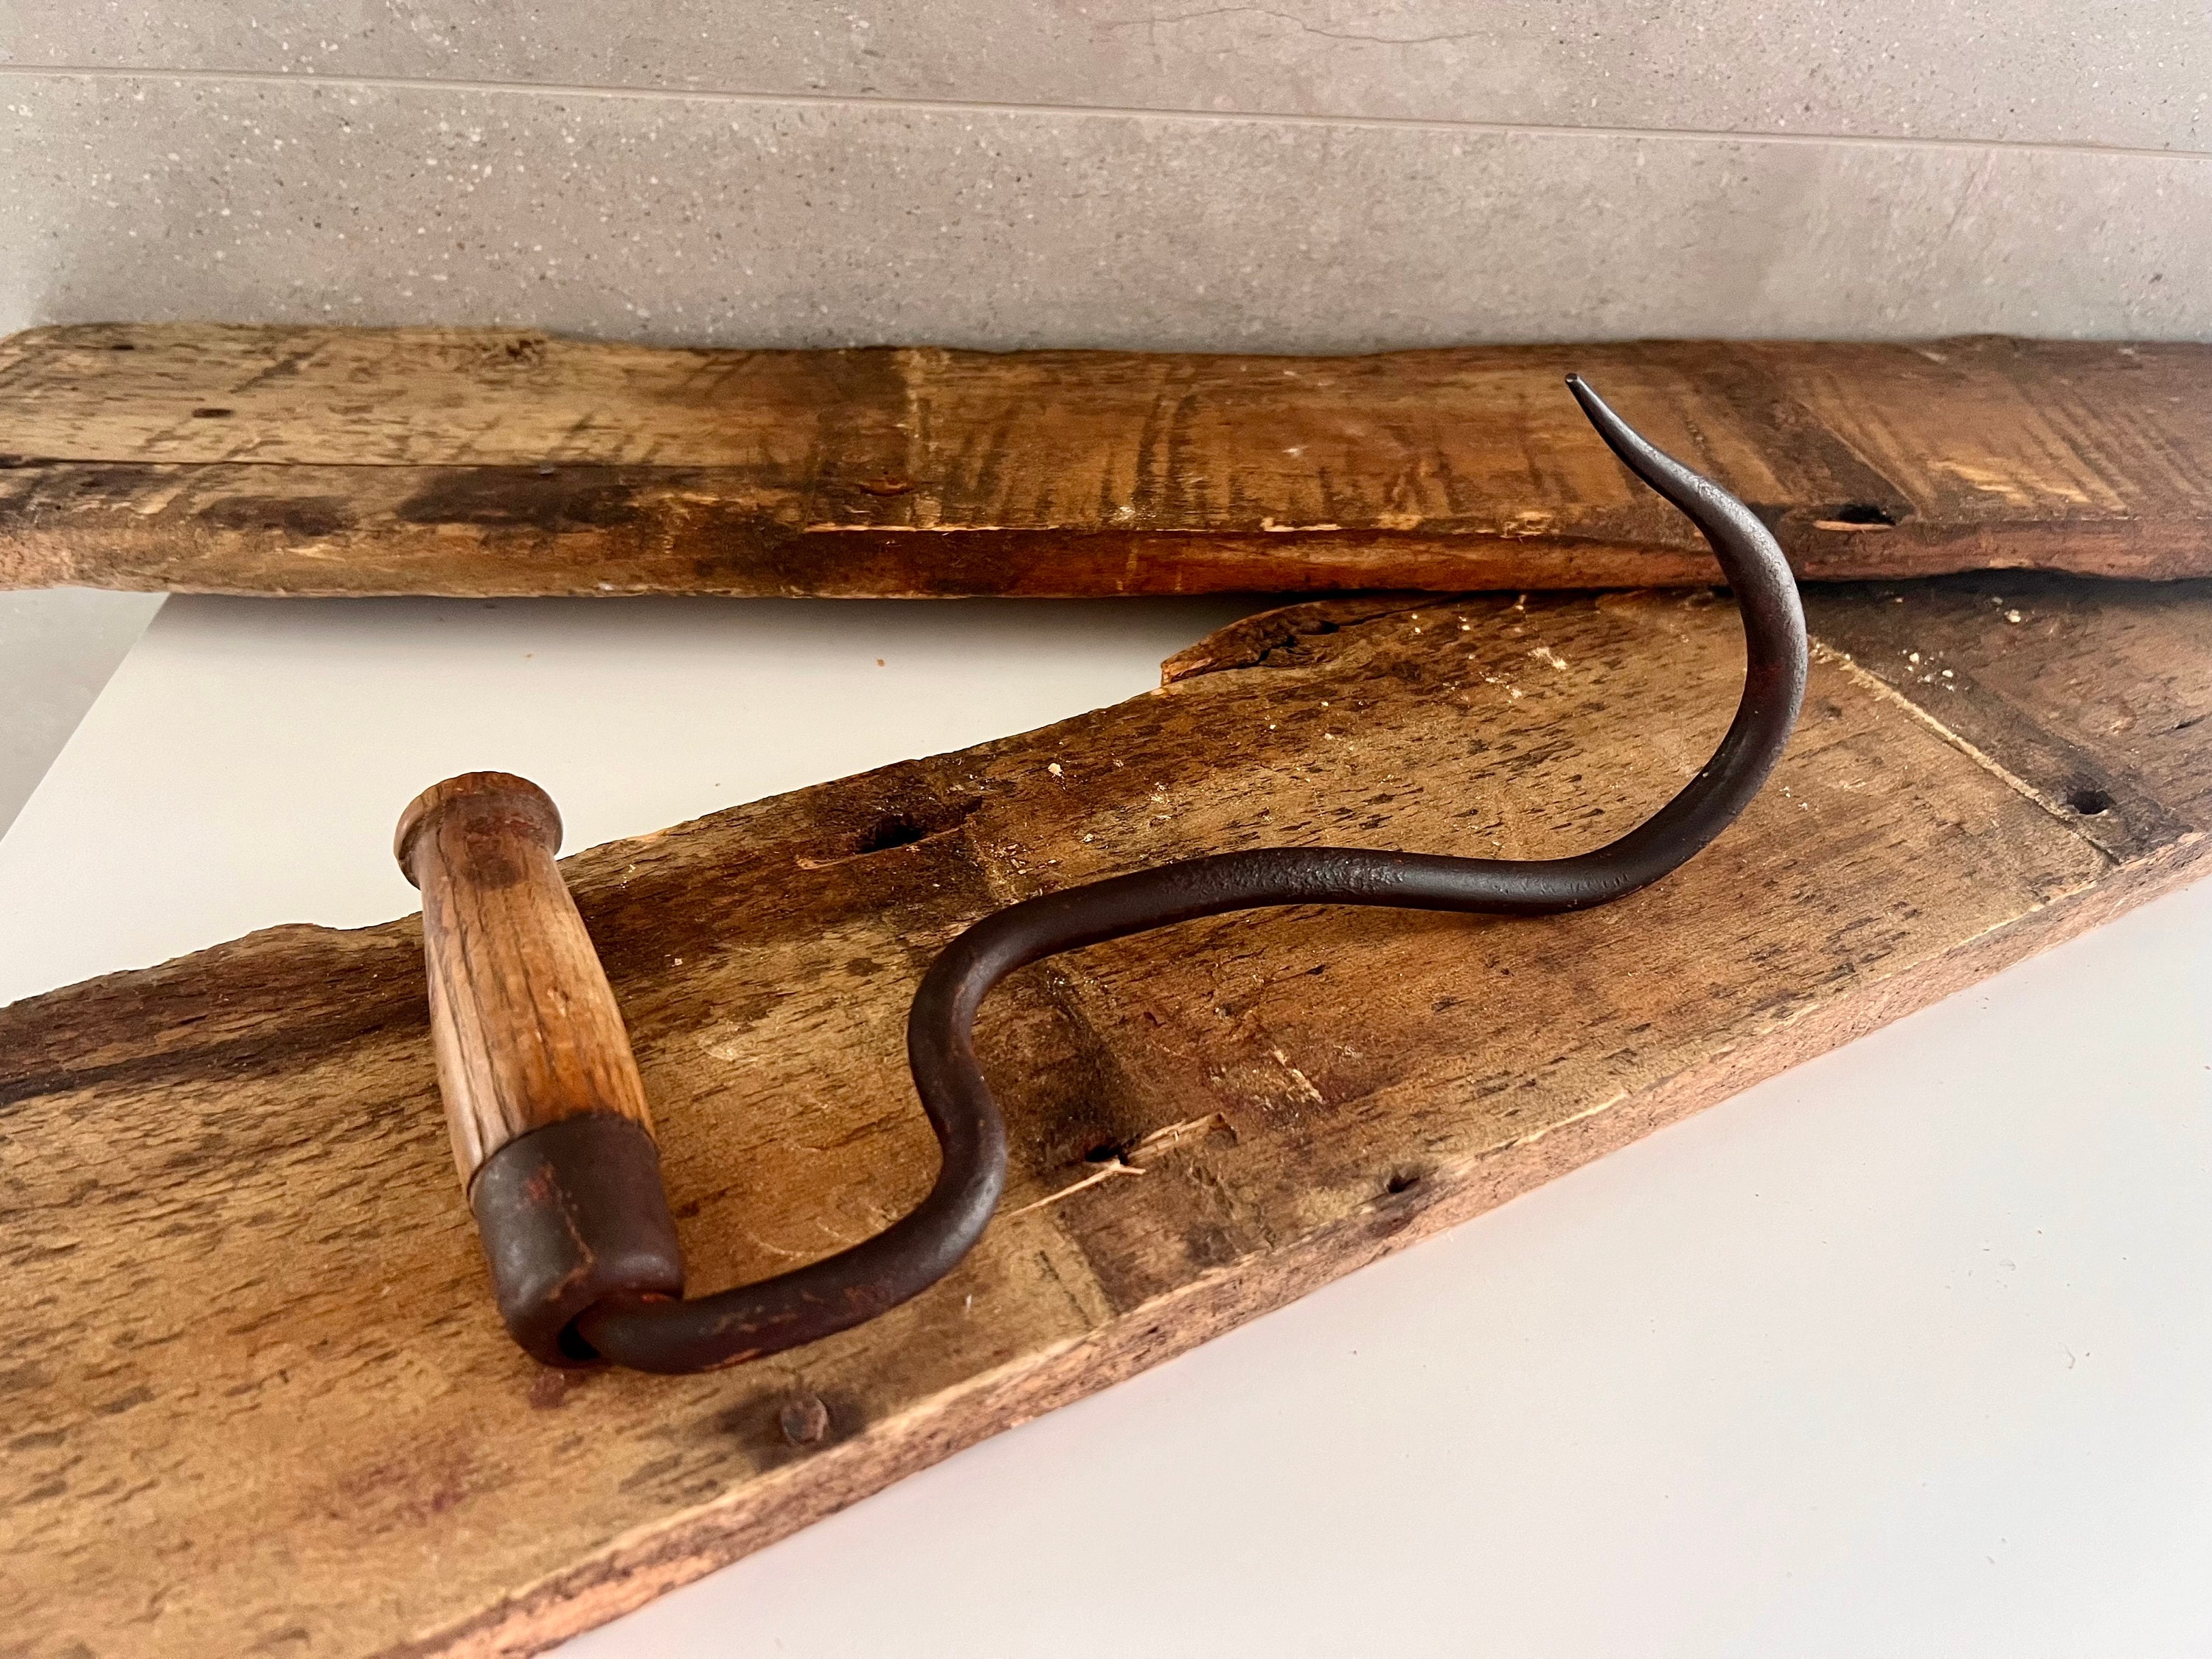 Vintage HAY BALE HOOK, Primitive Hand-Forged Iron Hay Hook, Antique Hay  Harvesting Tool, Early 1900s, Farm Tool, Primitive Farmhouse Decor